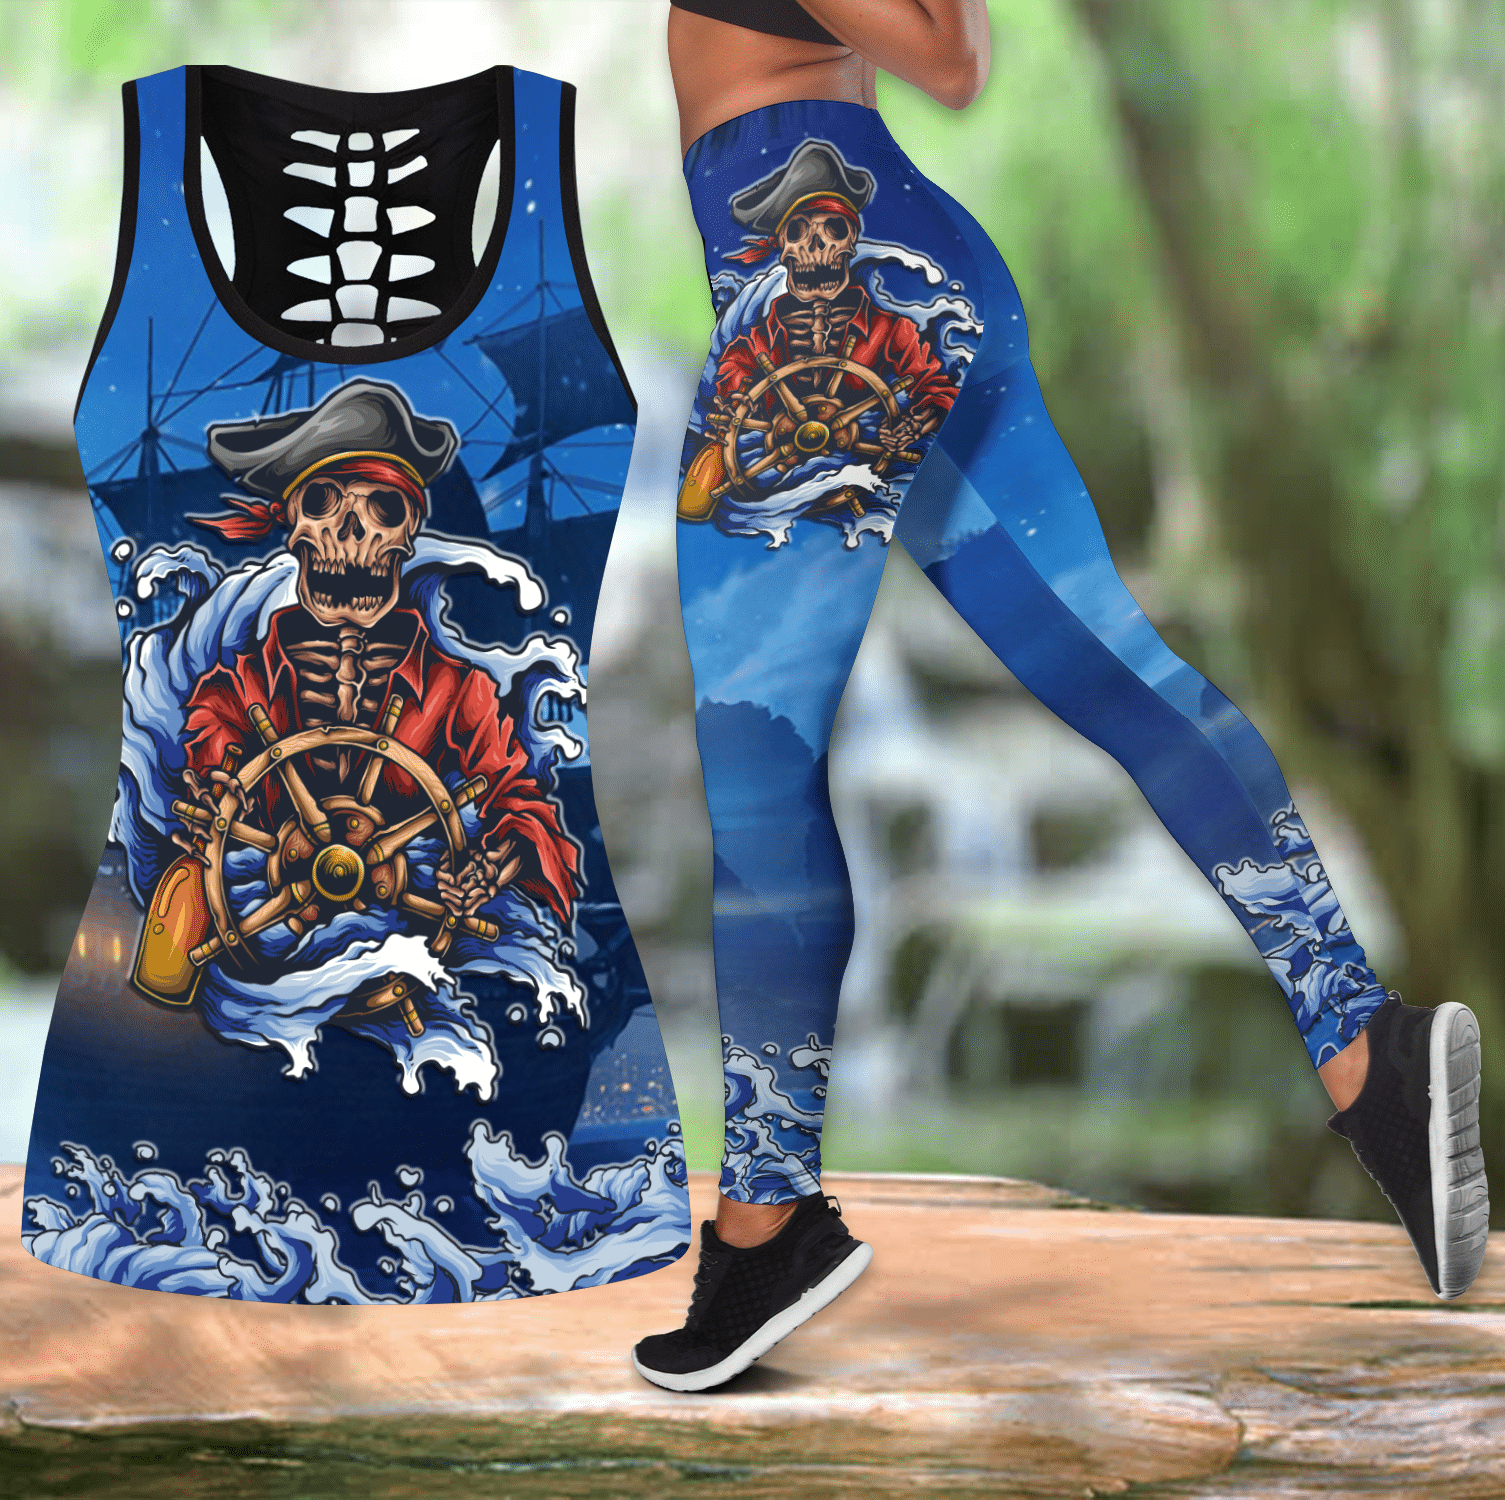 Love Pirate Skull and Tattoos tanktop & legging outfit for women QB06092001